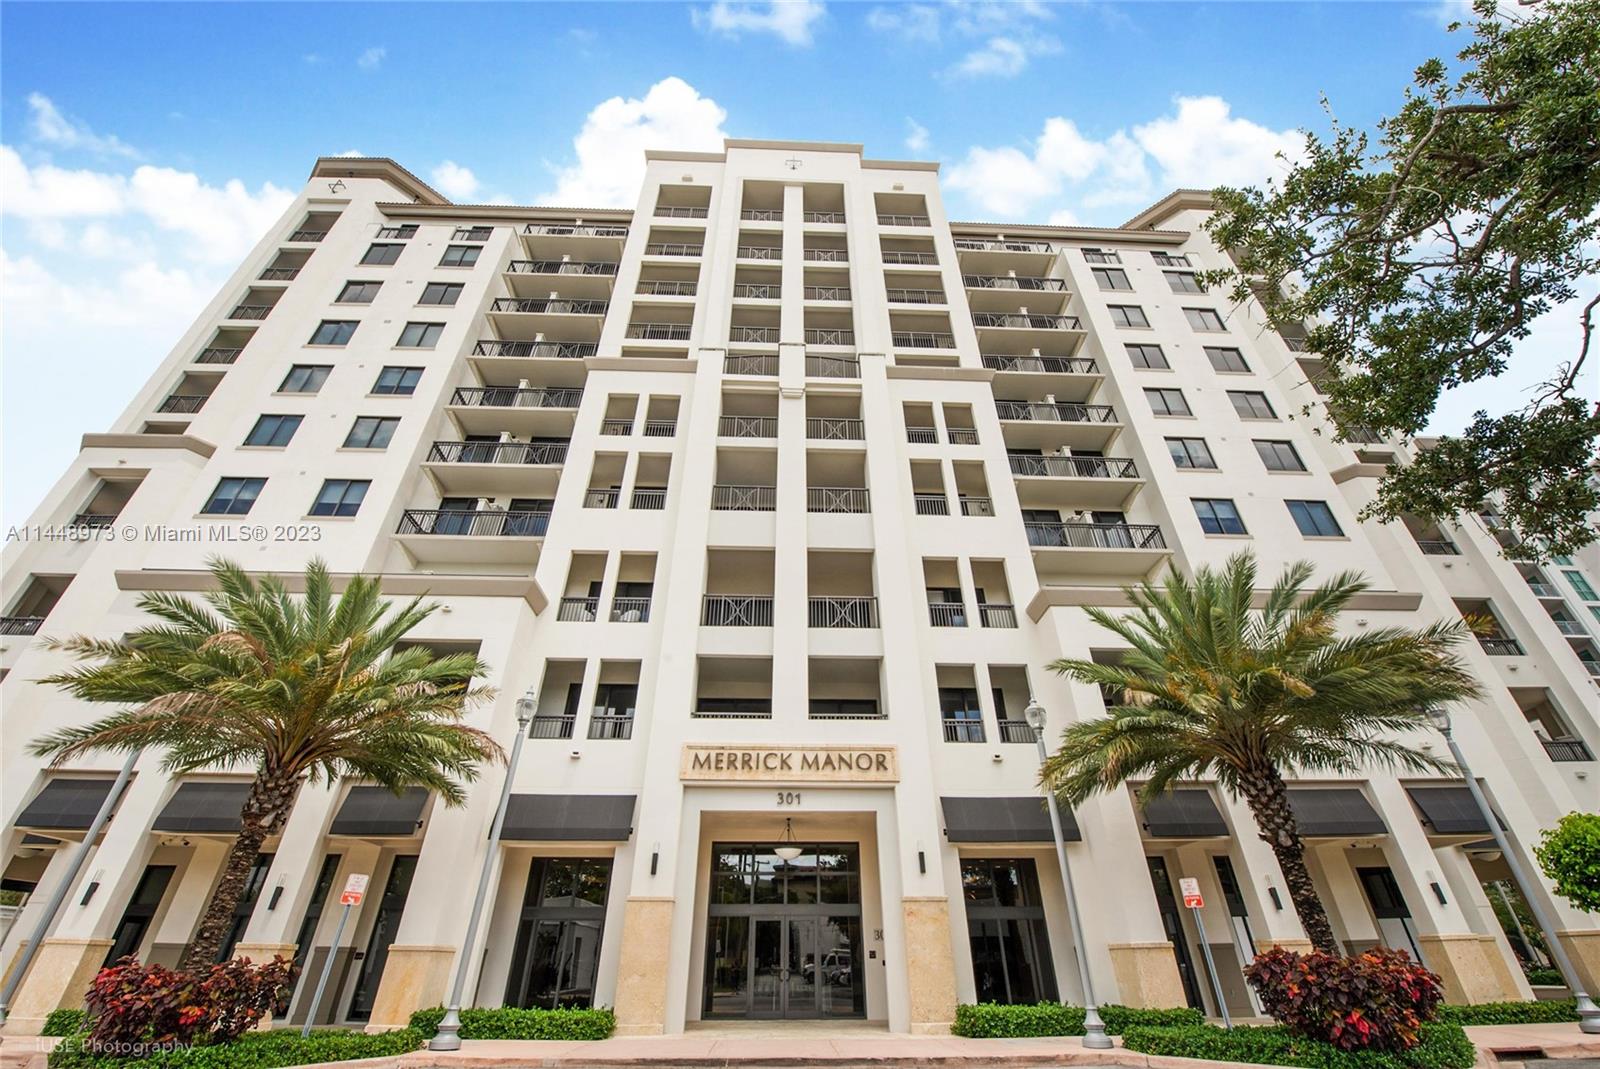 Welcome to the Luxurious Merrick Manor in the heart of Coral Gables - a trendy and walkable area minutes from upscale shopping, fine dining, near Merrick Park.

This beautiful, modern unit offers an open concept living area, 2 bedrooms, 2 1/2 bathrooms with large balconies, a gourmet kitchen and high ceilings, walk-in closets, Bosch appliances, white Quartz countertops.

Full service building with valet, a fitness center, conference room, business center and gathering room. Pool area includes a BBQ section with dining tables and chairs.  Pet friendly building. Close to top rated schools, shops and restaurants.  Minutes away from Miracle Mile, University of Miami and Biltmore Hotel and Golf. 24 hours concierge.  Don’t miss this opportunity. 

Contact me now to schedule your tour!